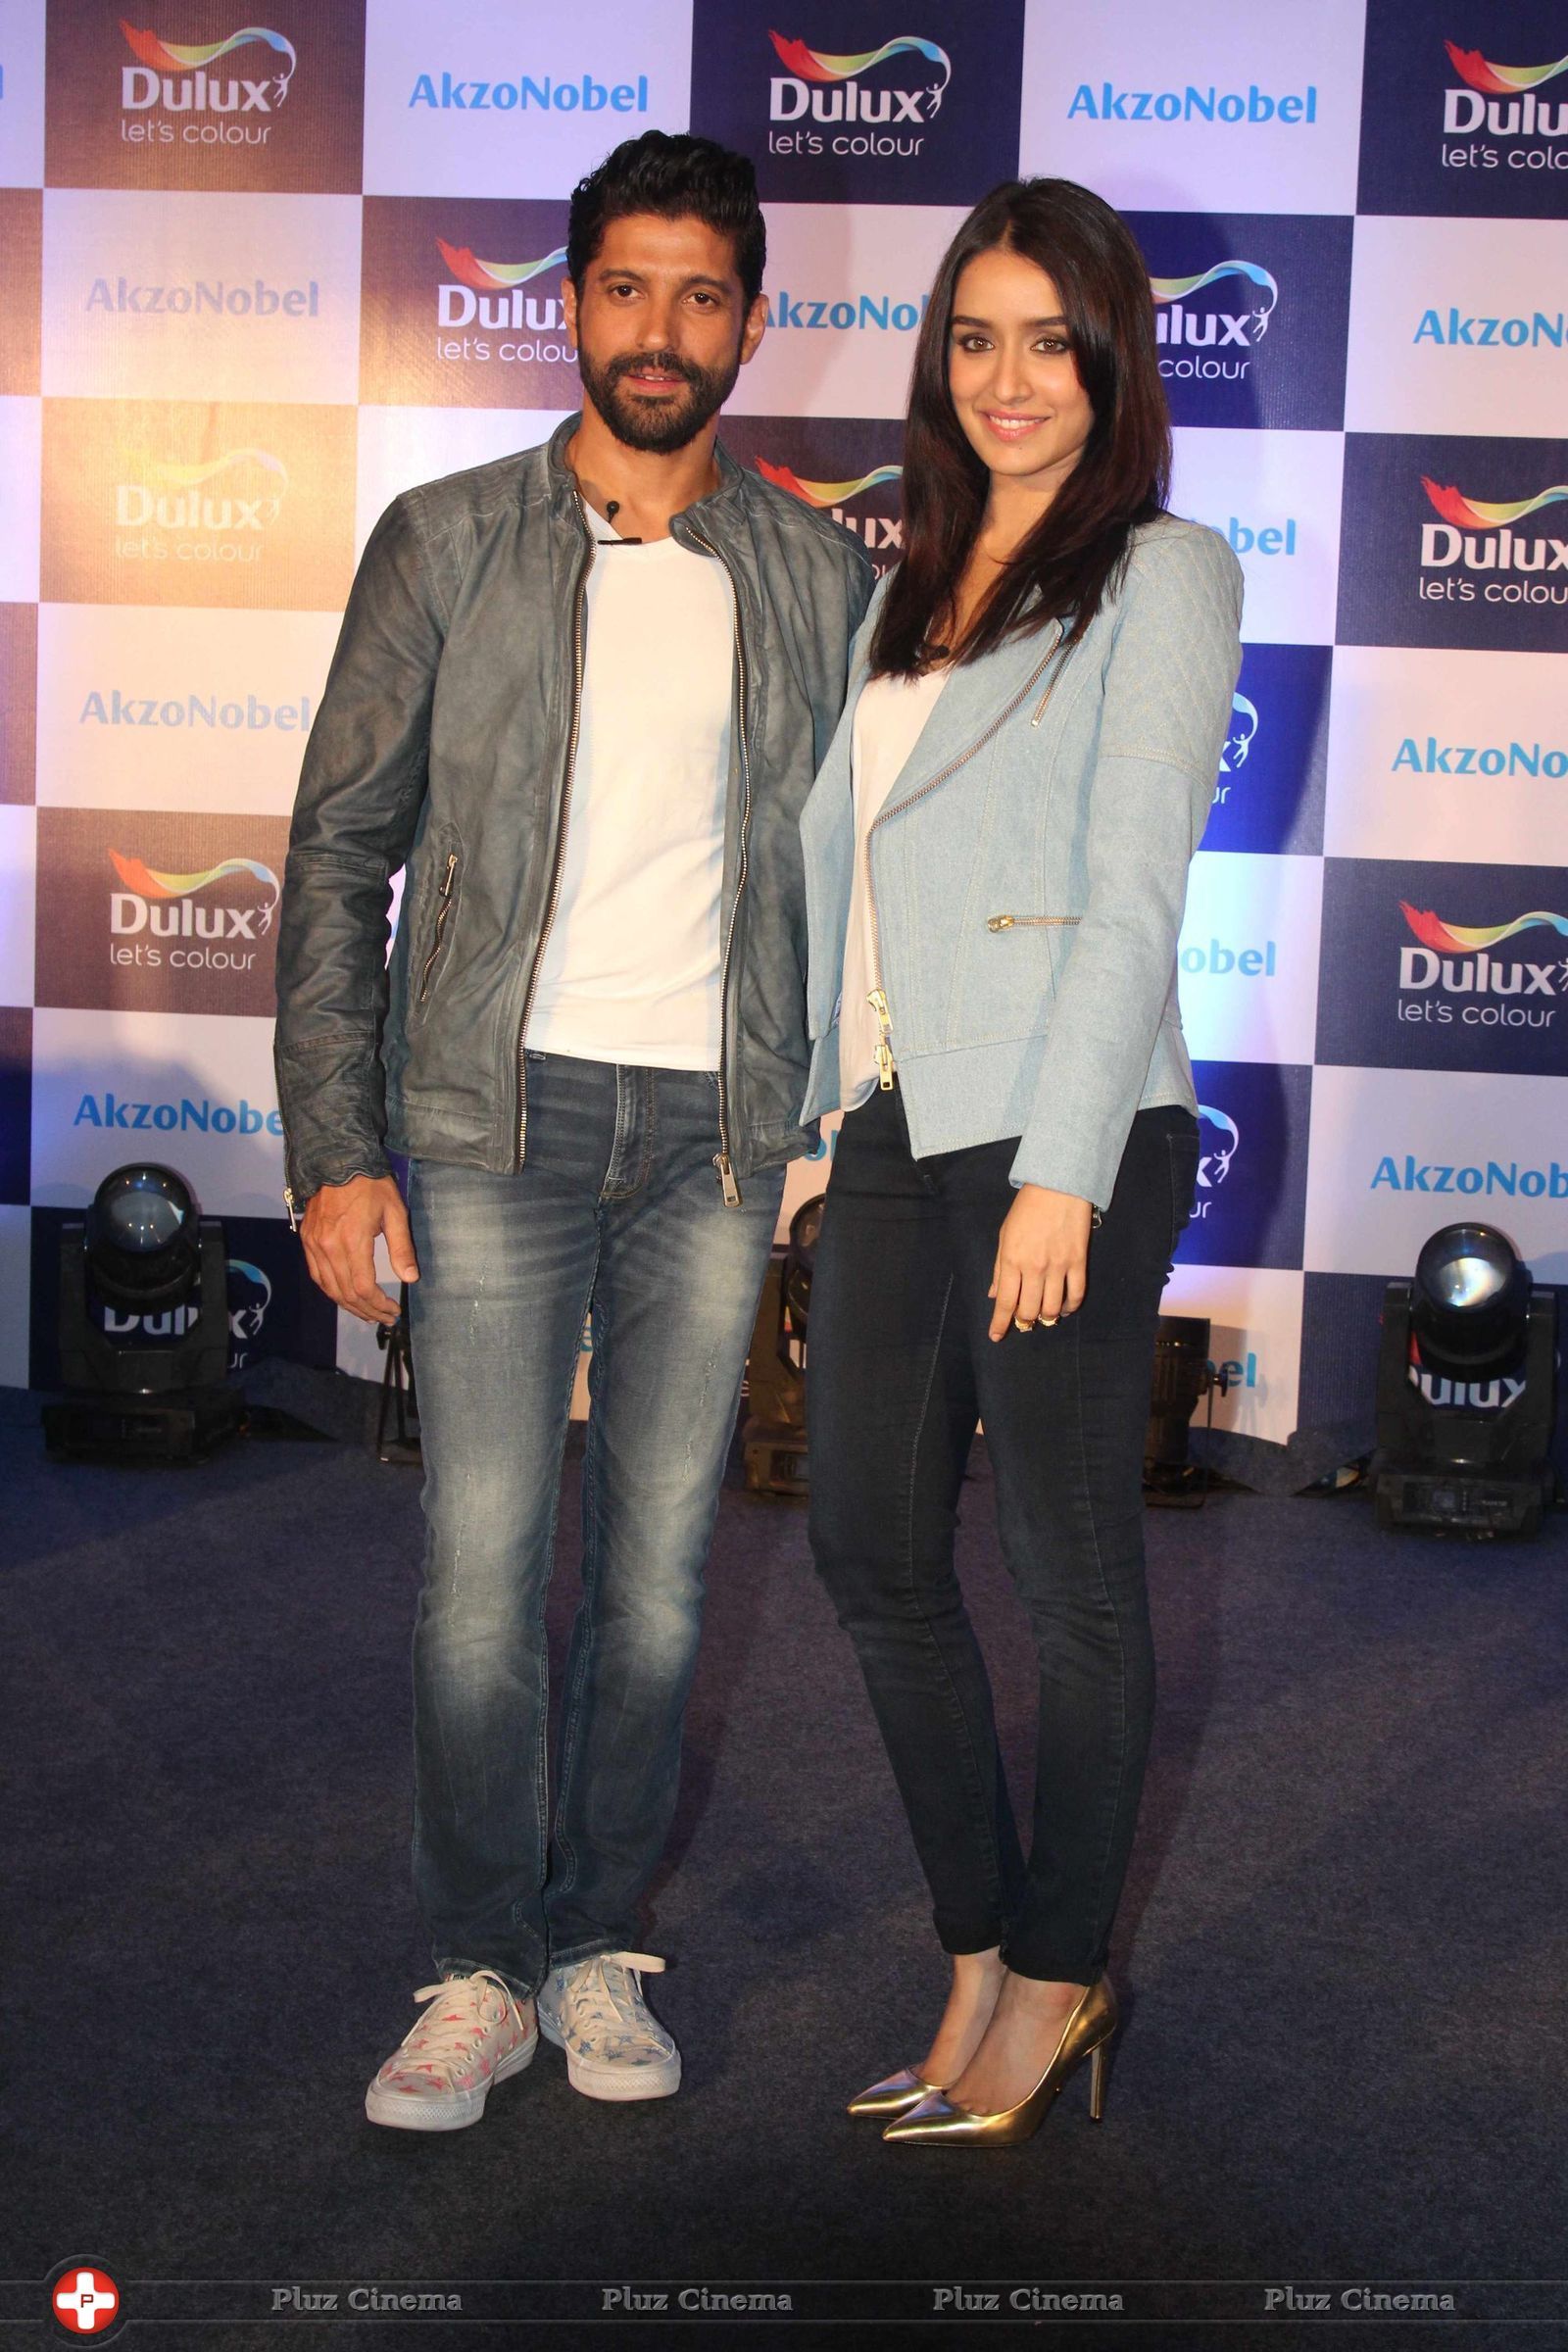 Farhan Akhtar and Shraddha Kapoor at the launch of Dulux new Color Range Photos | Picture 1445955